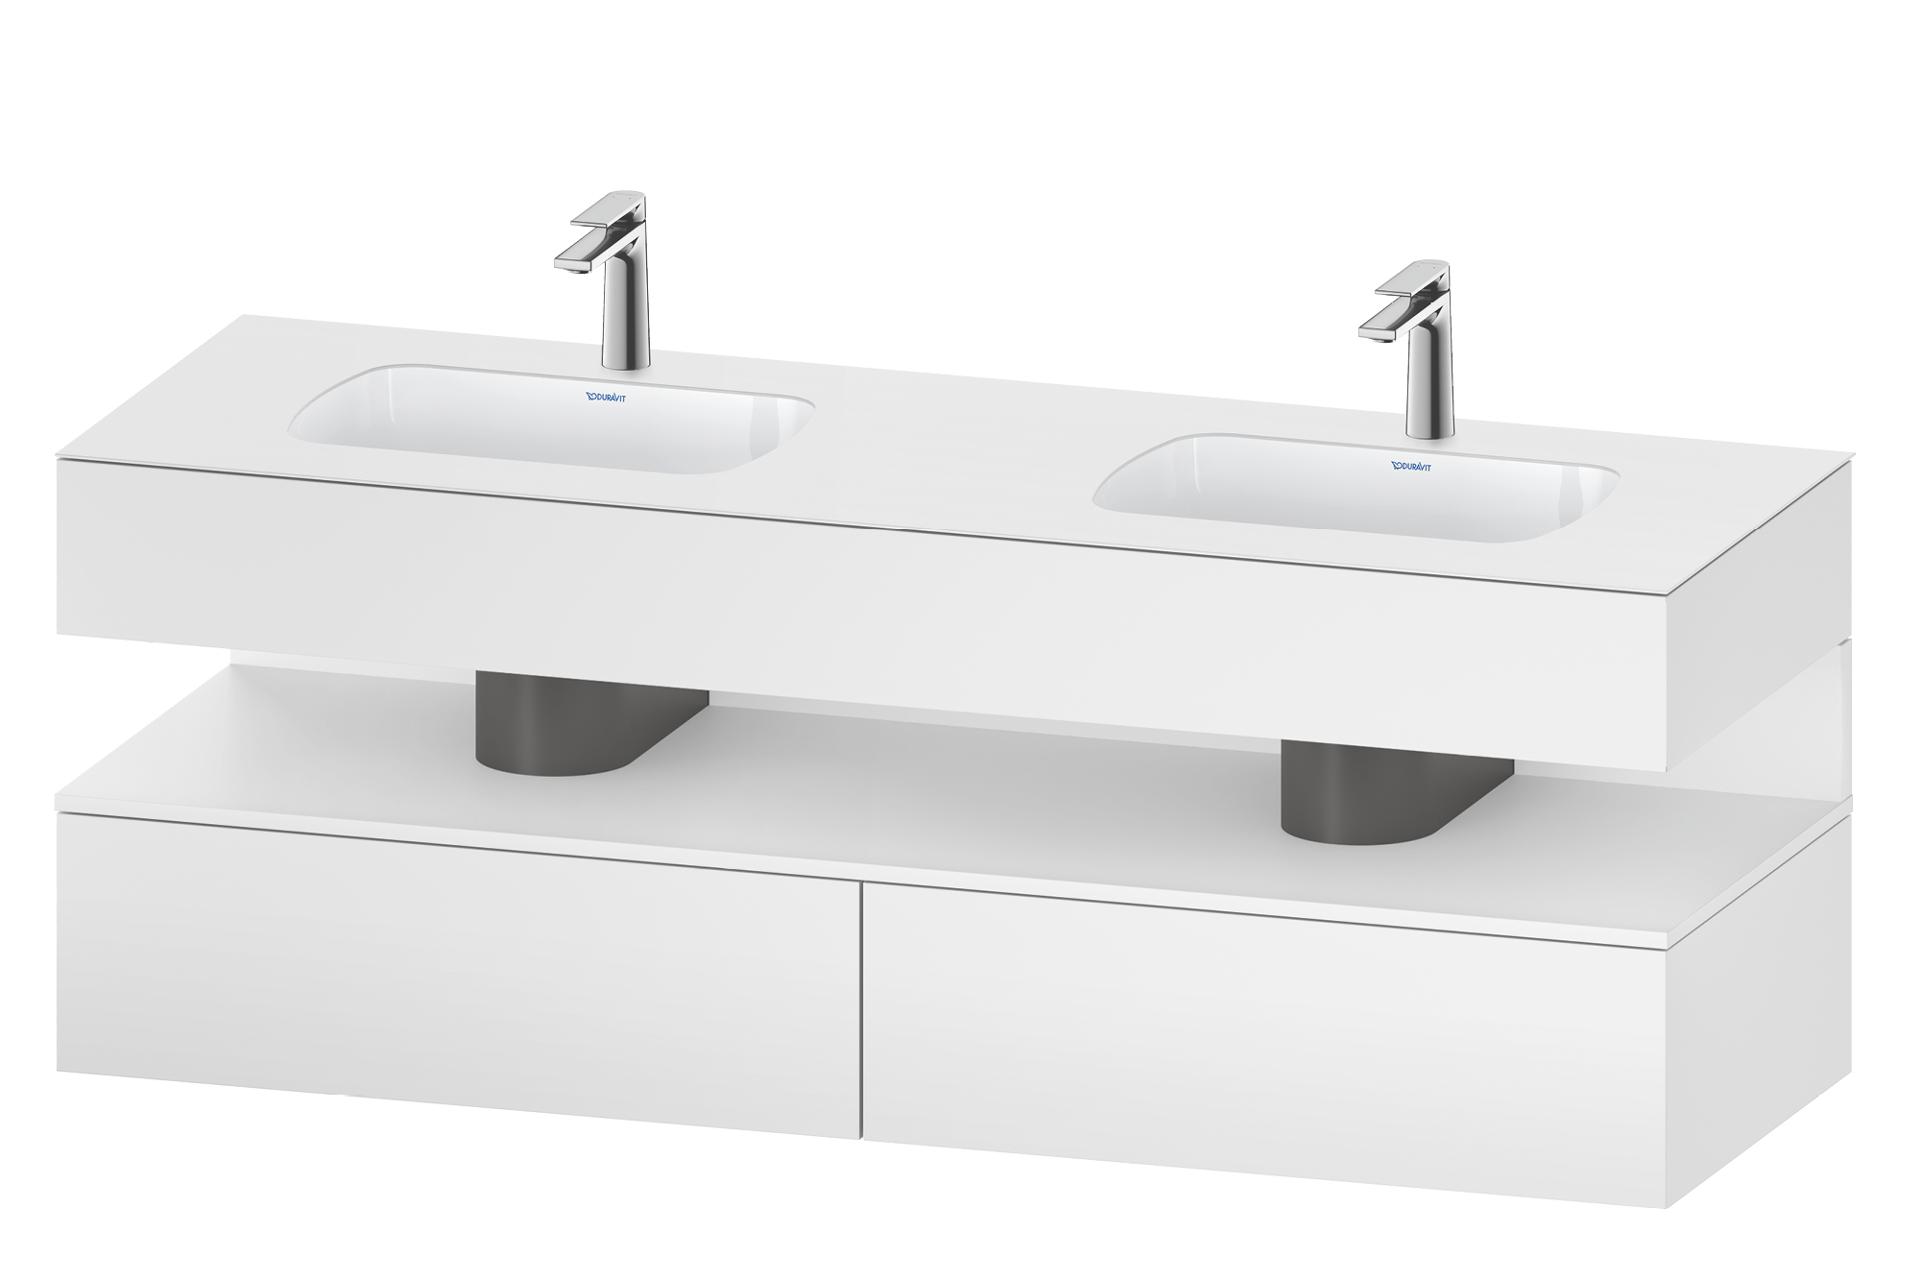 Console vanity unit with drawer that blends smoothly with built-in washbasin
